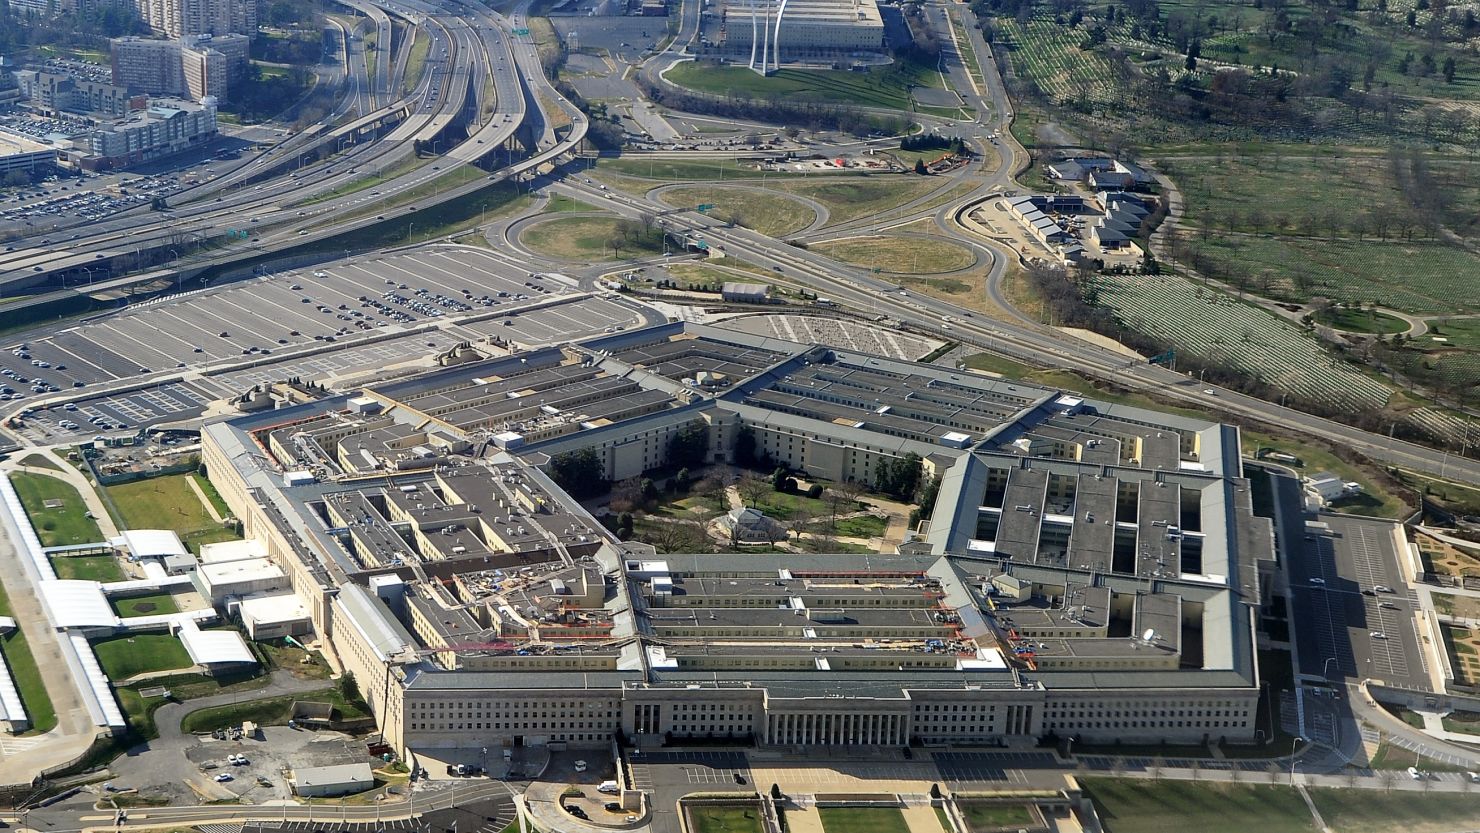 The Pentagon in Washington is shown in this Dec. 26, 2011 file photo.